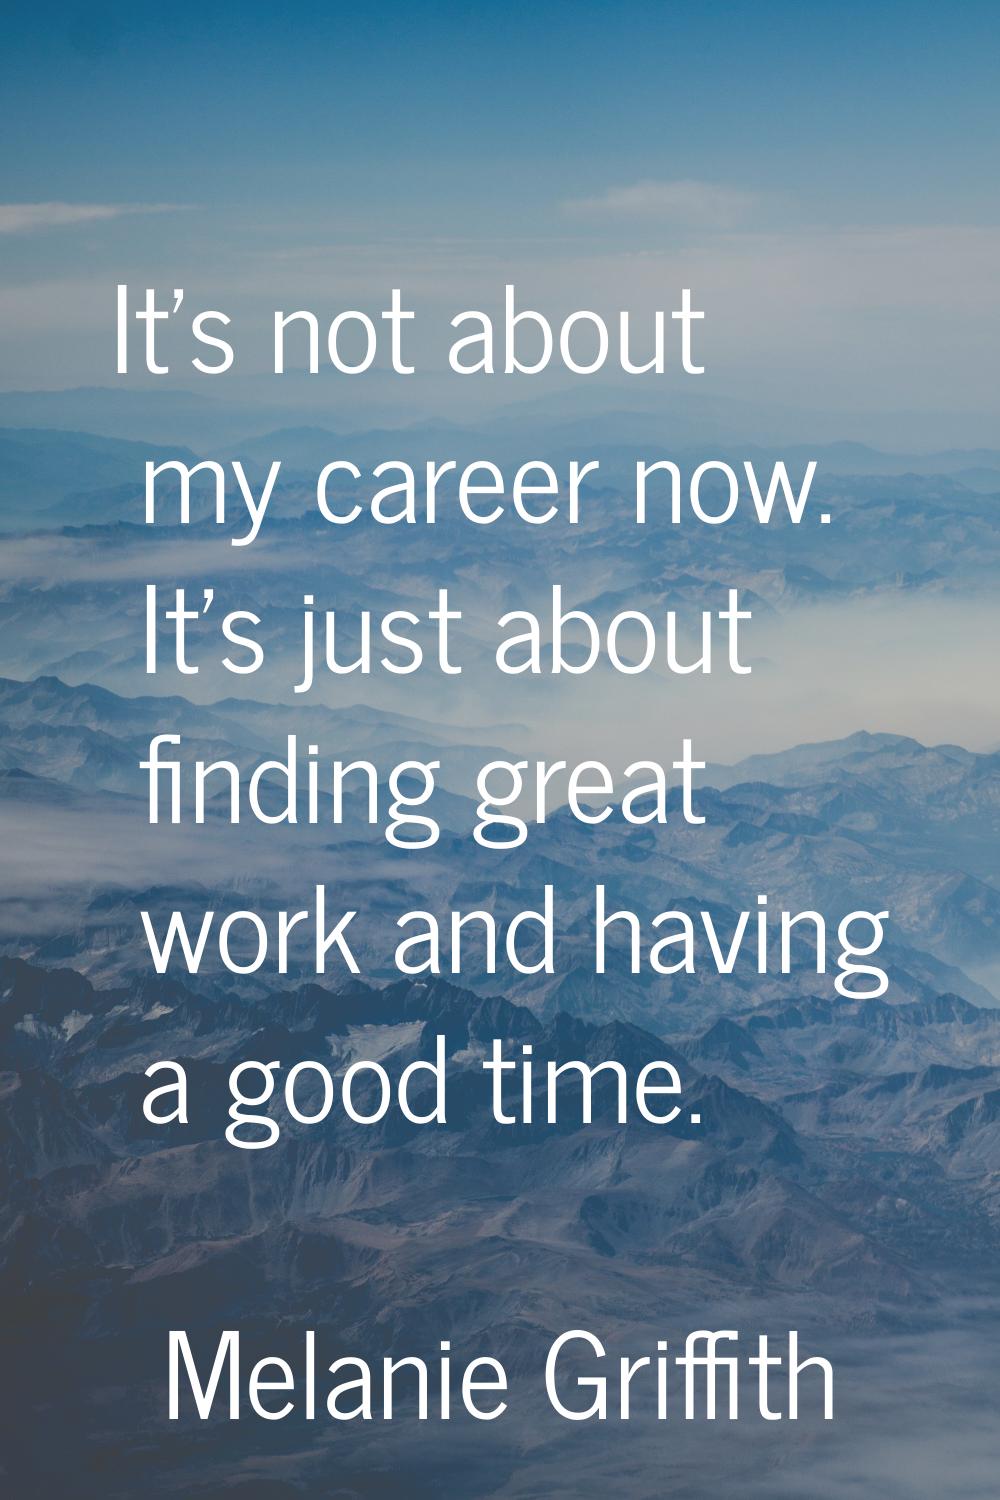 It's not about my career now. It's just about finding great work and having a good time.